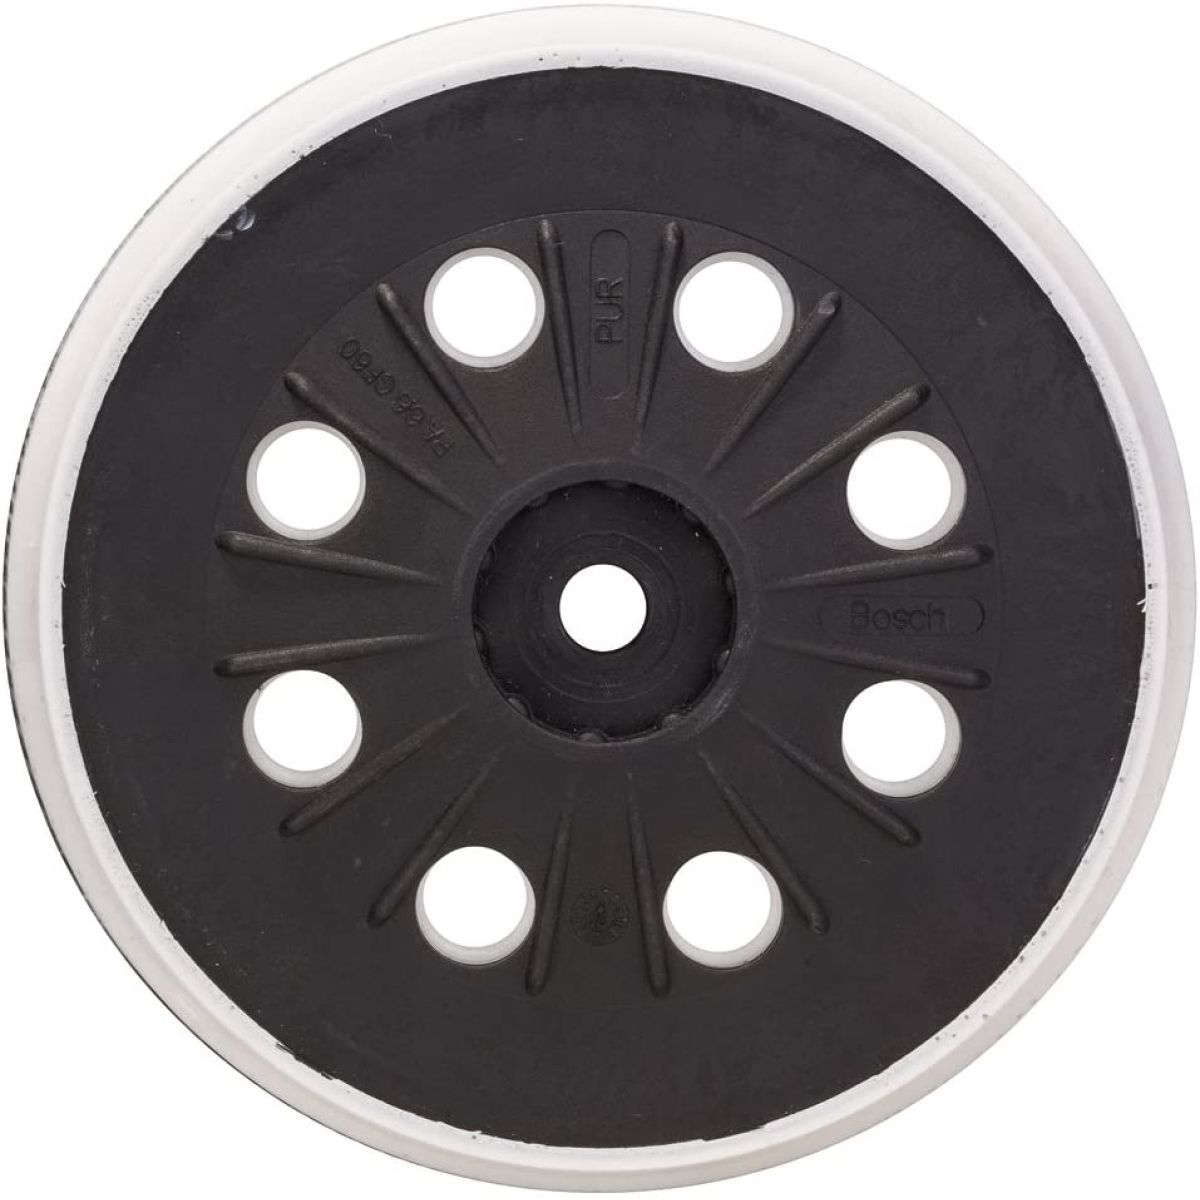 Bosch Velcro Back Up Pad 125mm For GEX 125-150 AVE